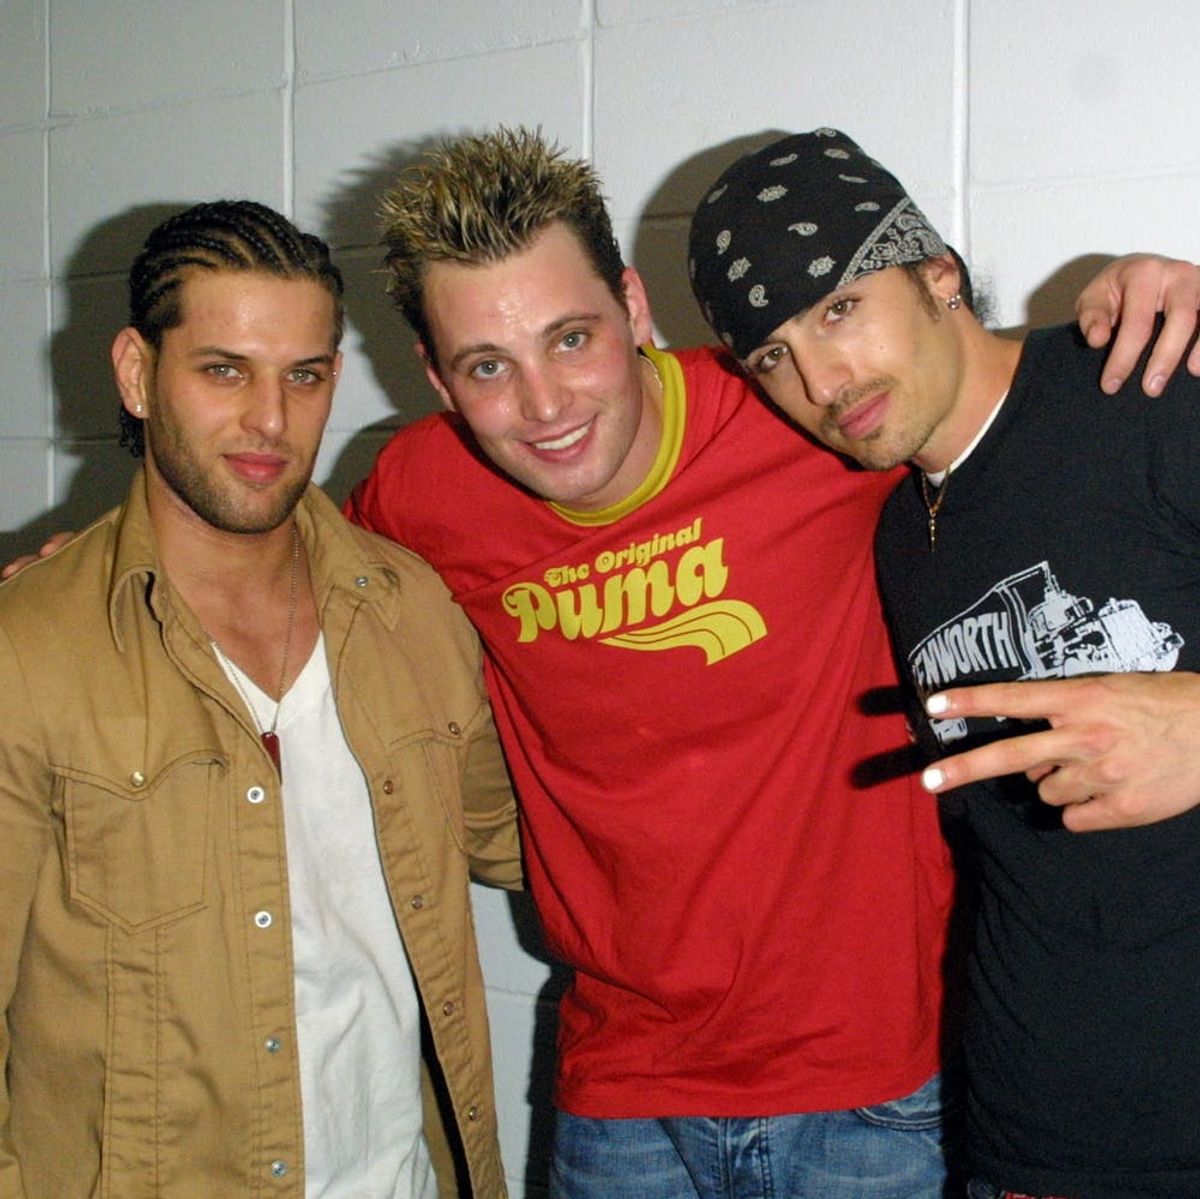 LFO Singer Devin Lima Diagnosed With Stage 4 Cancer